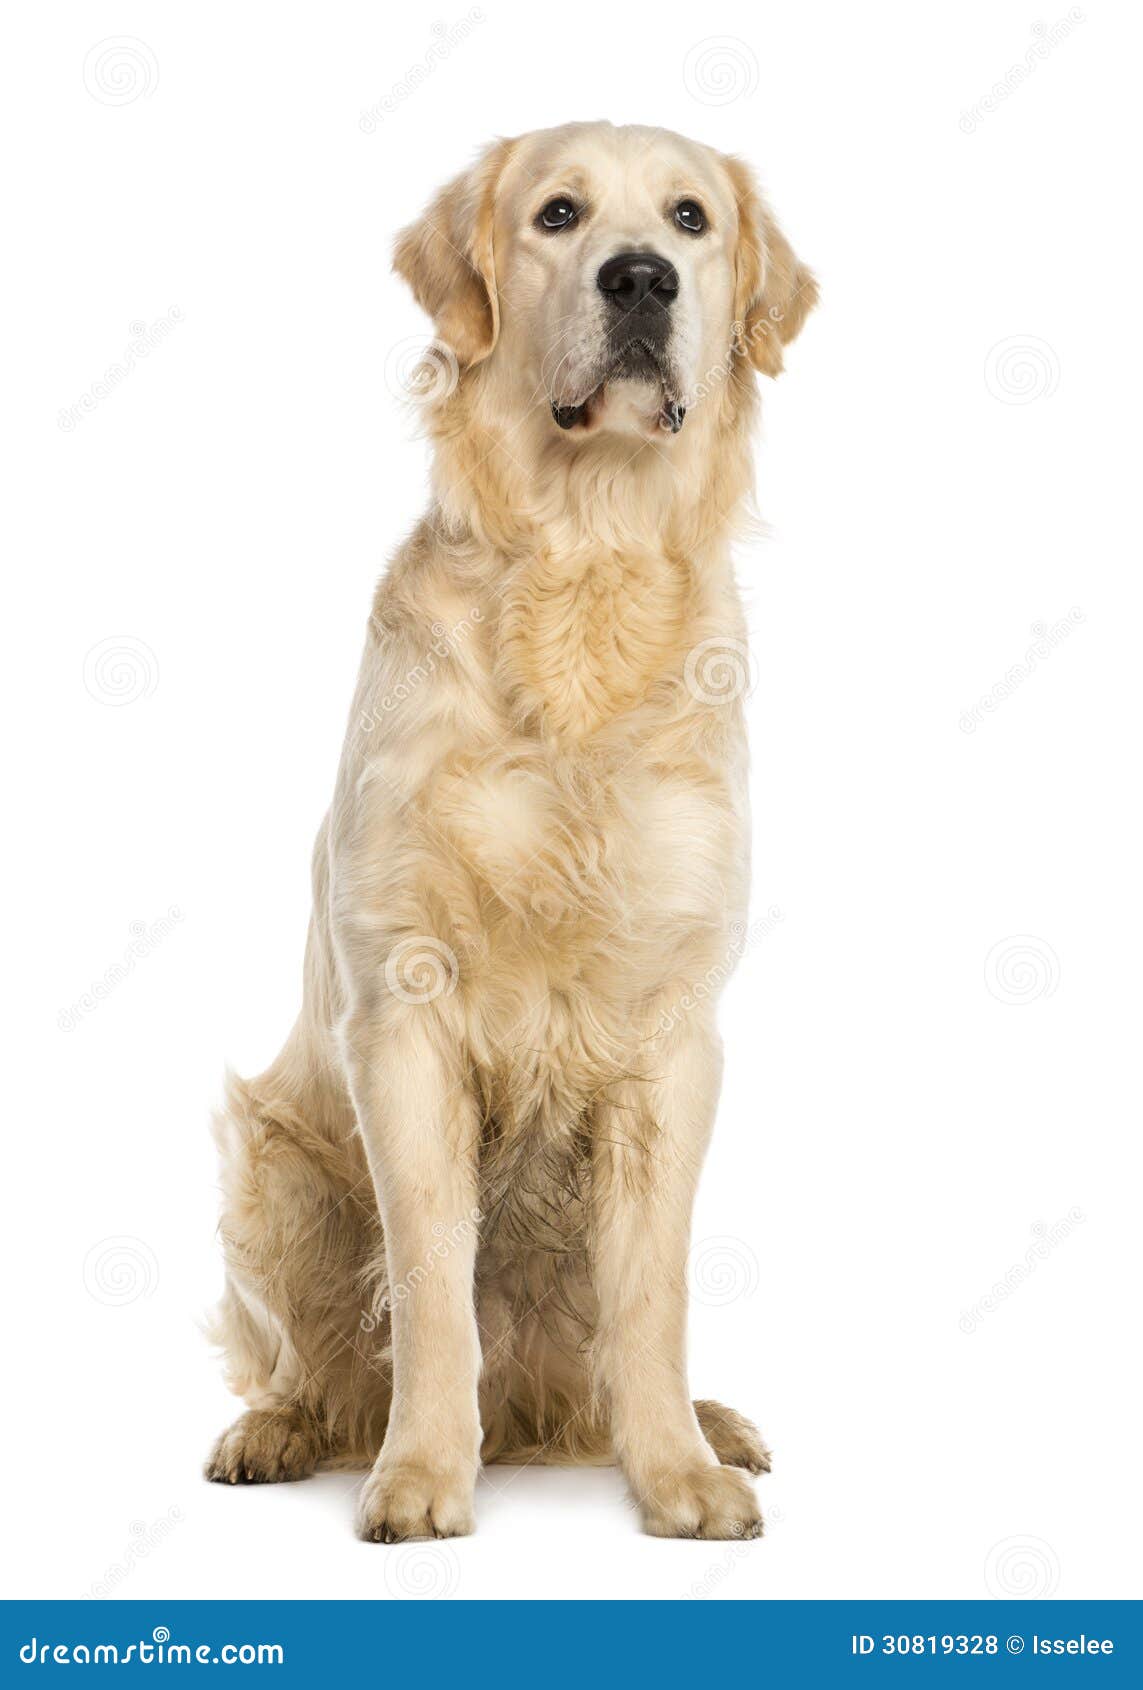 Golden Retriever One Year Old Stting Stock Photo Image Of View Alone 30819328